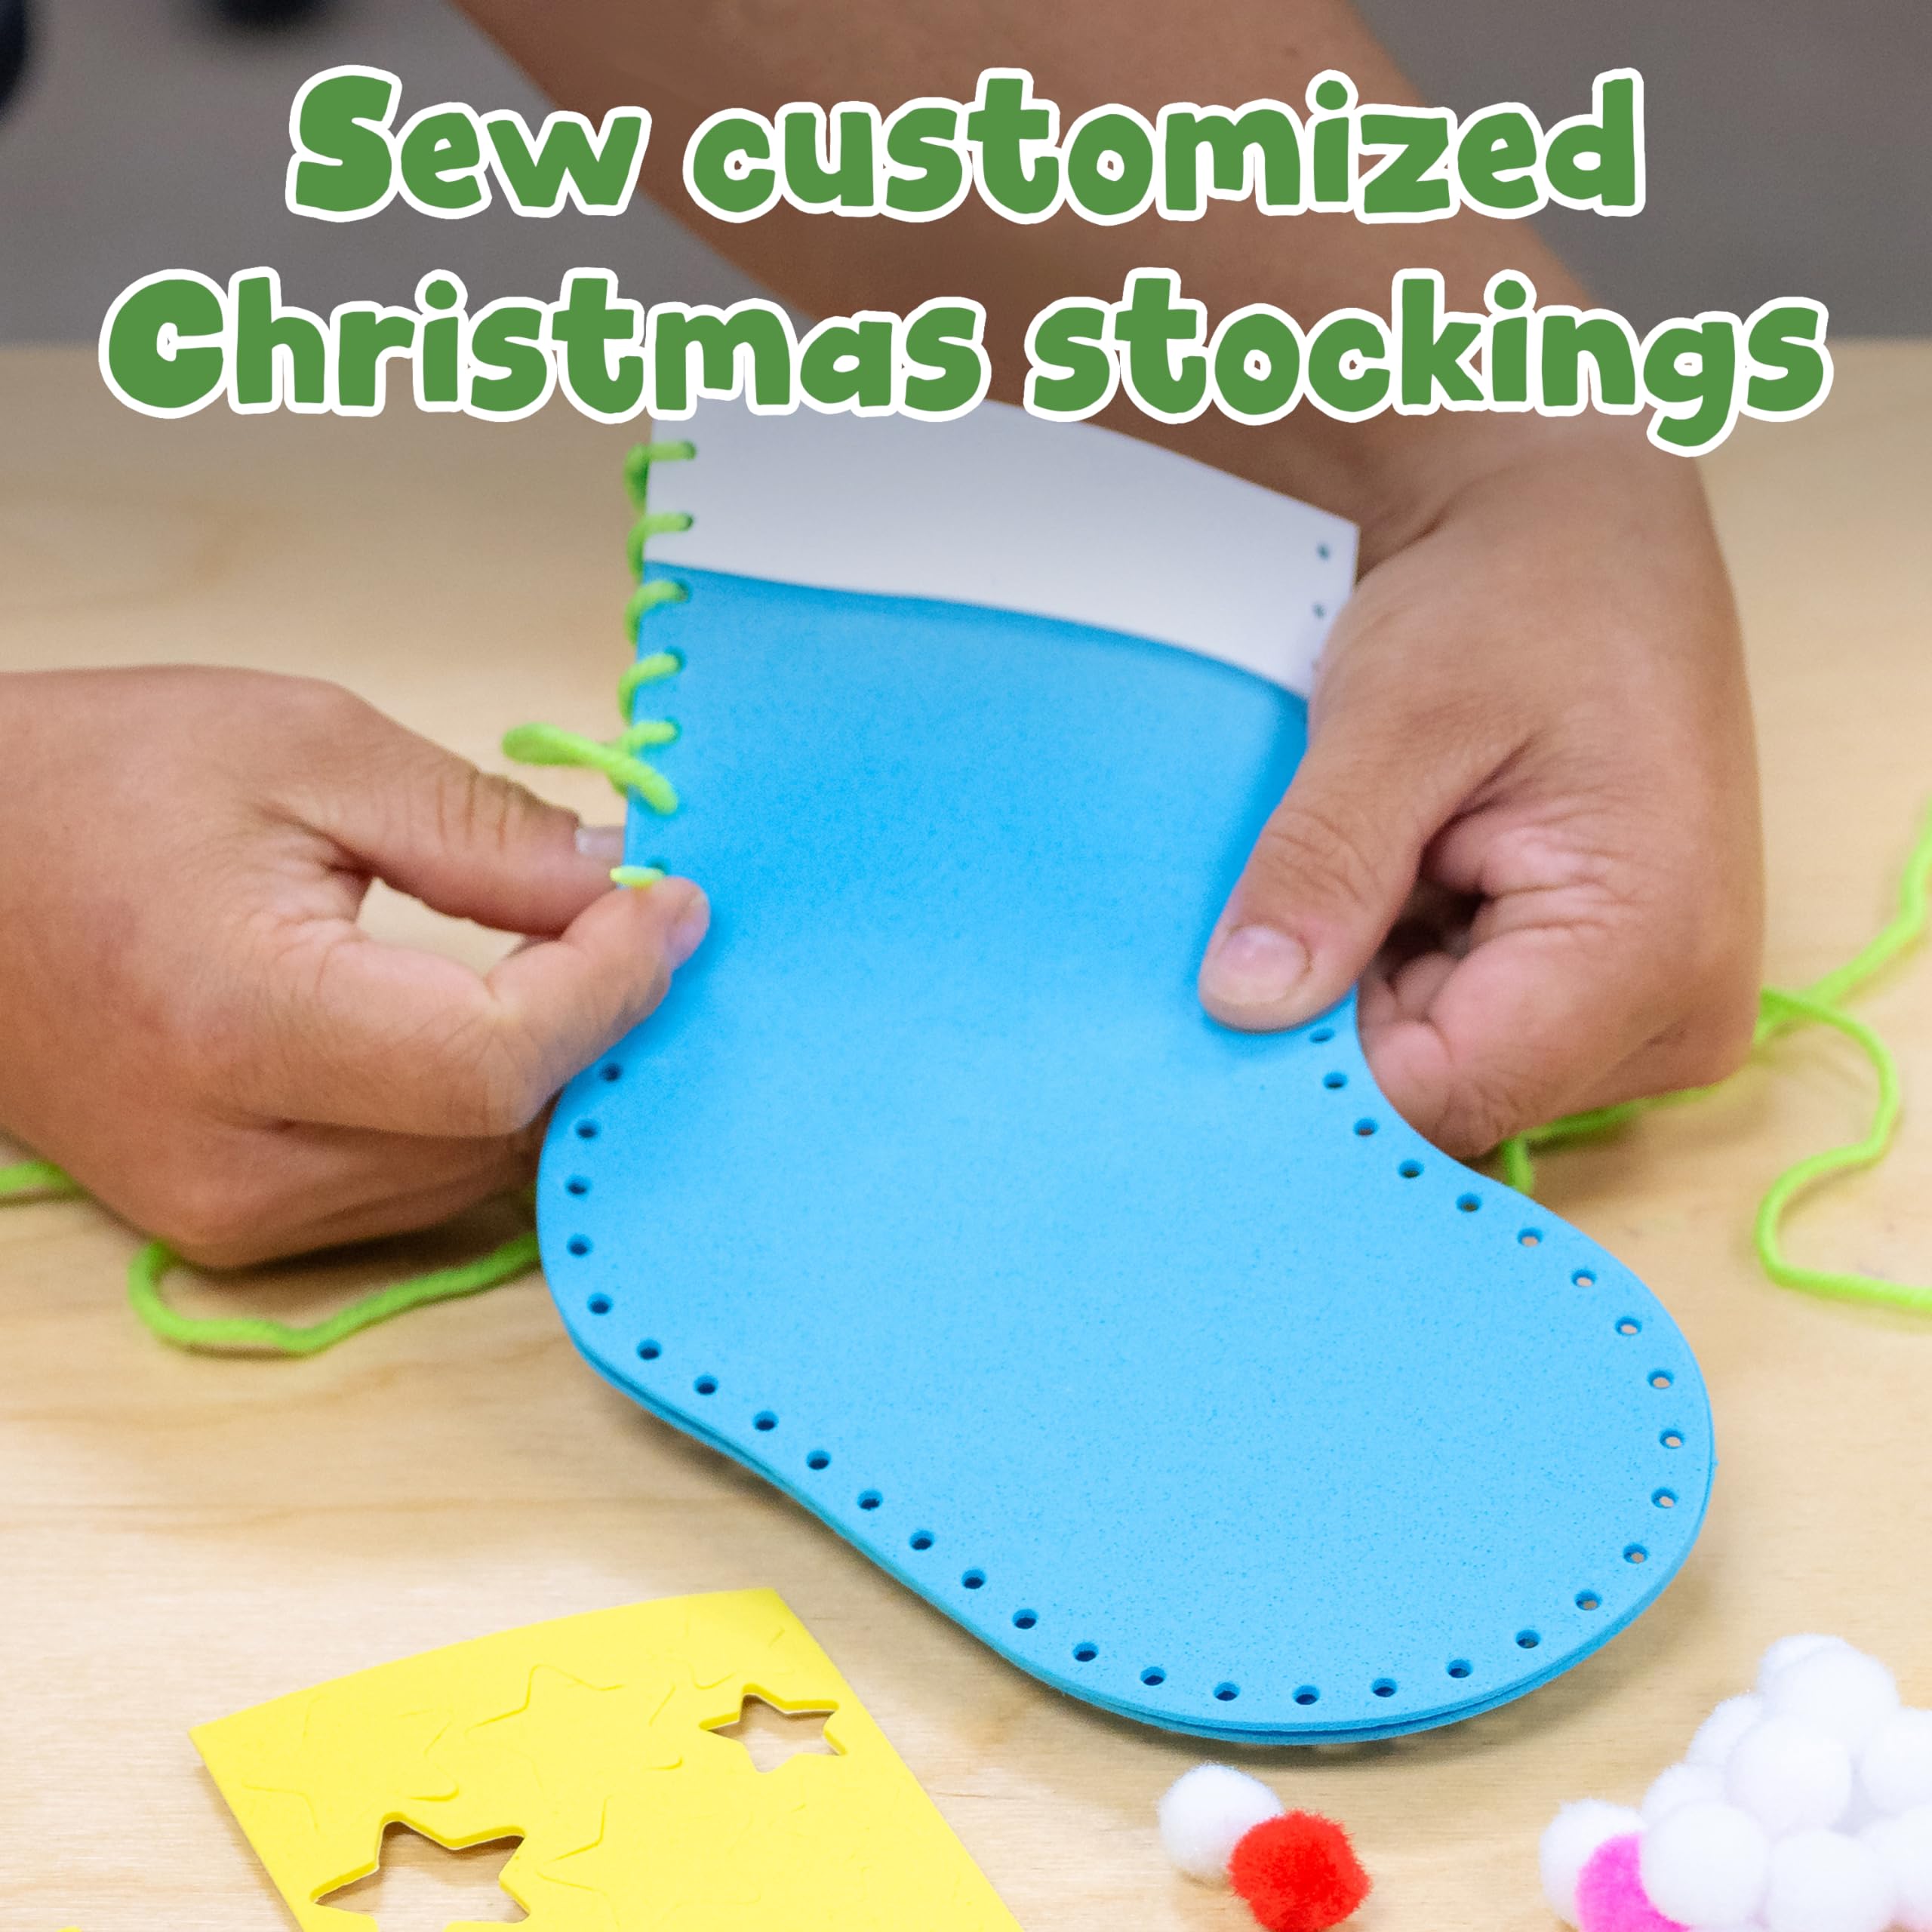 Ready 2 Learn Christmas Crafts - Create Your Own Christmas Stockings - Foam - Set of 4 - Christmas Decorations for Home - All Materials Included